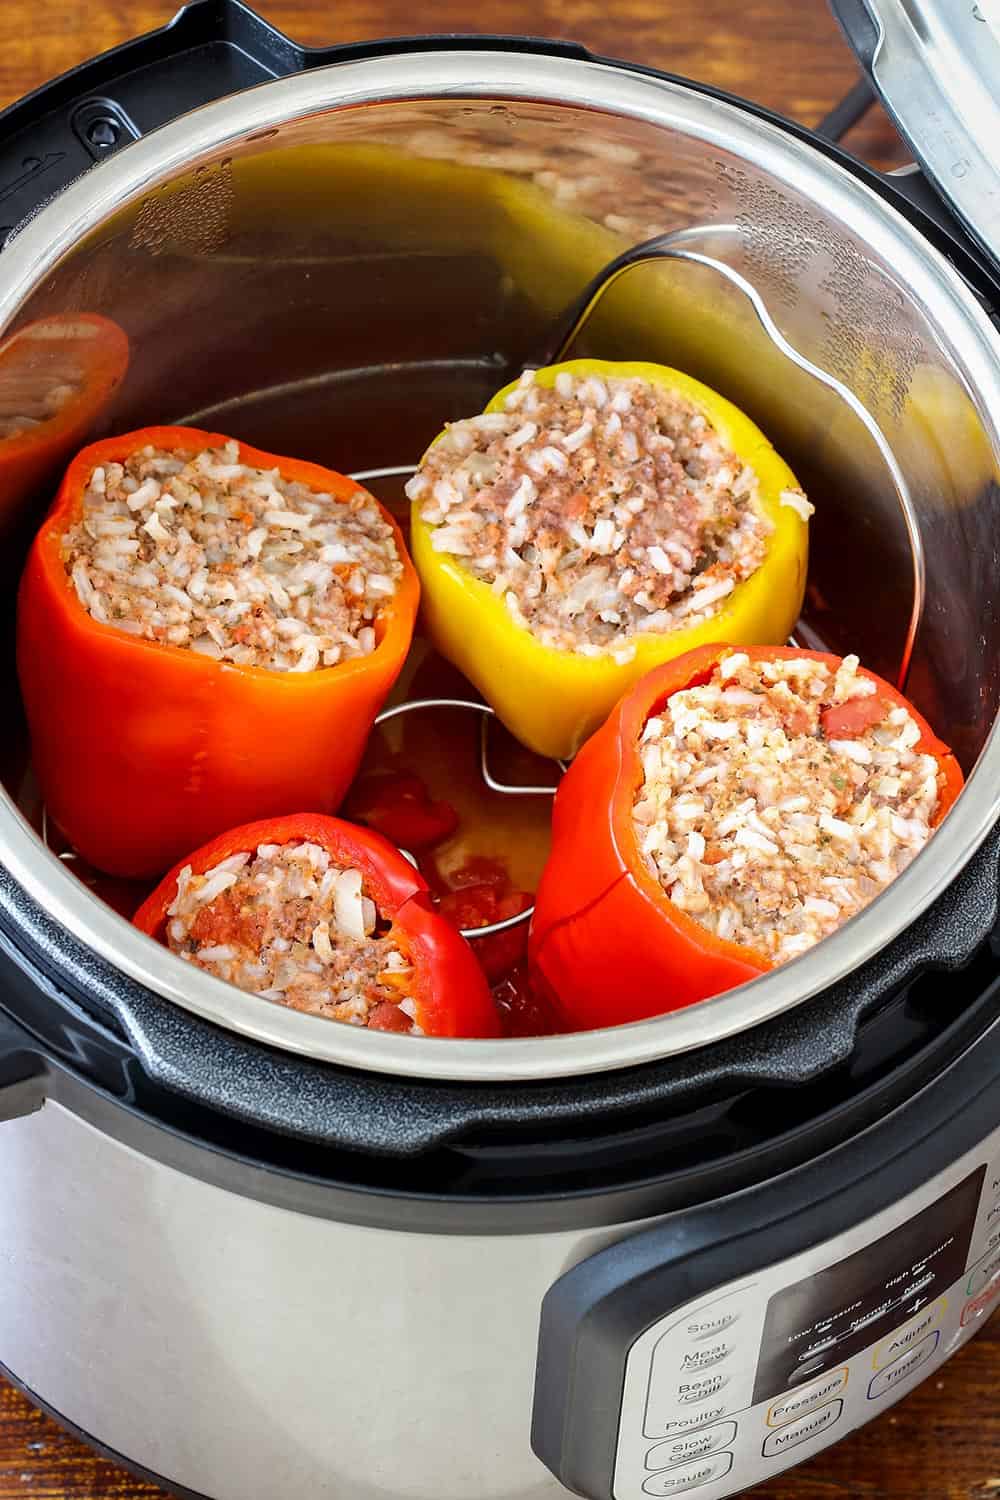 Pressure cooker stuffed with peppers